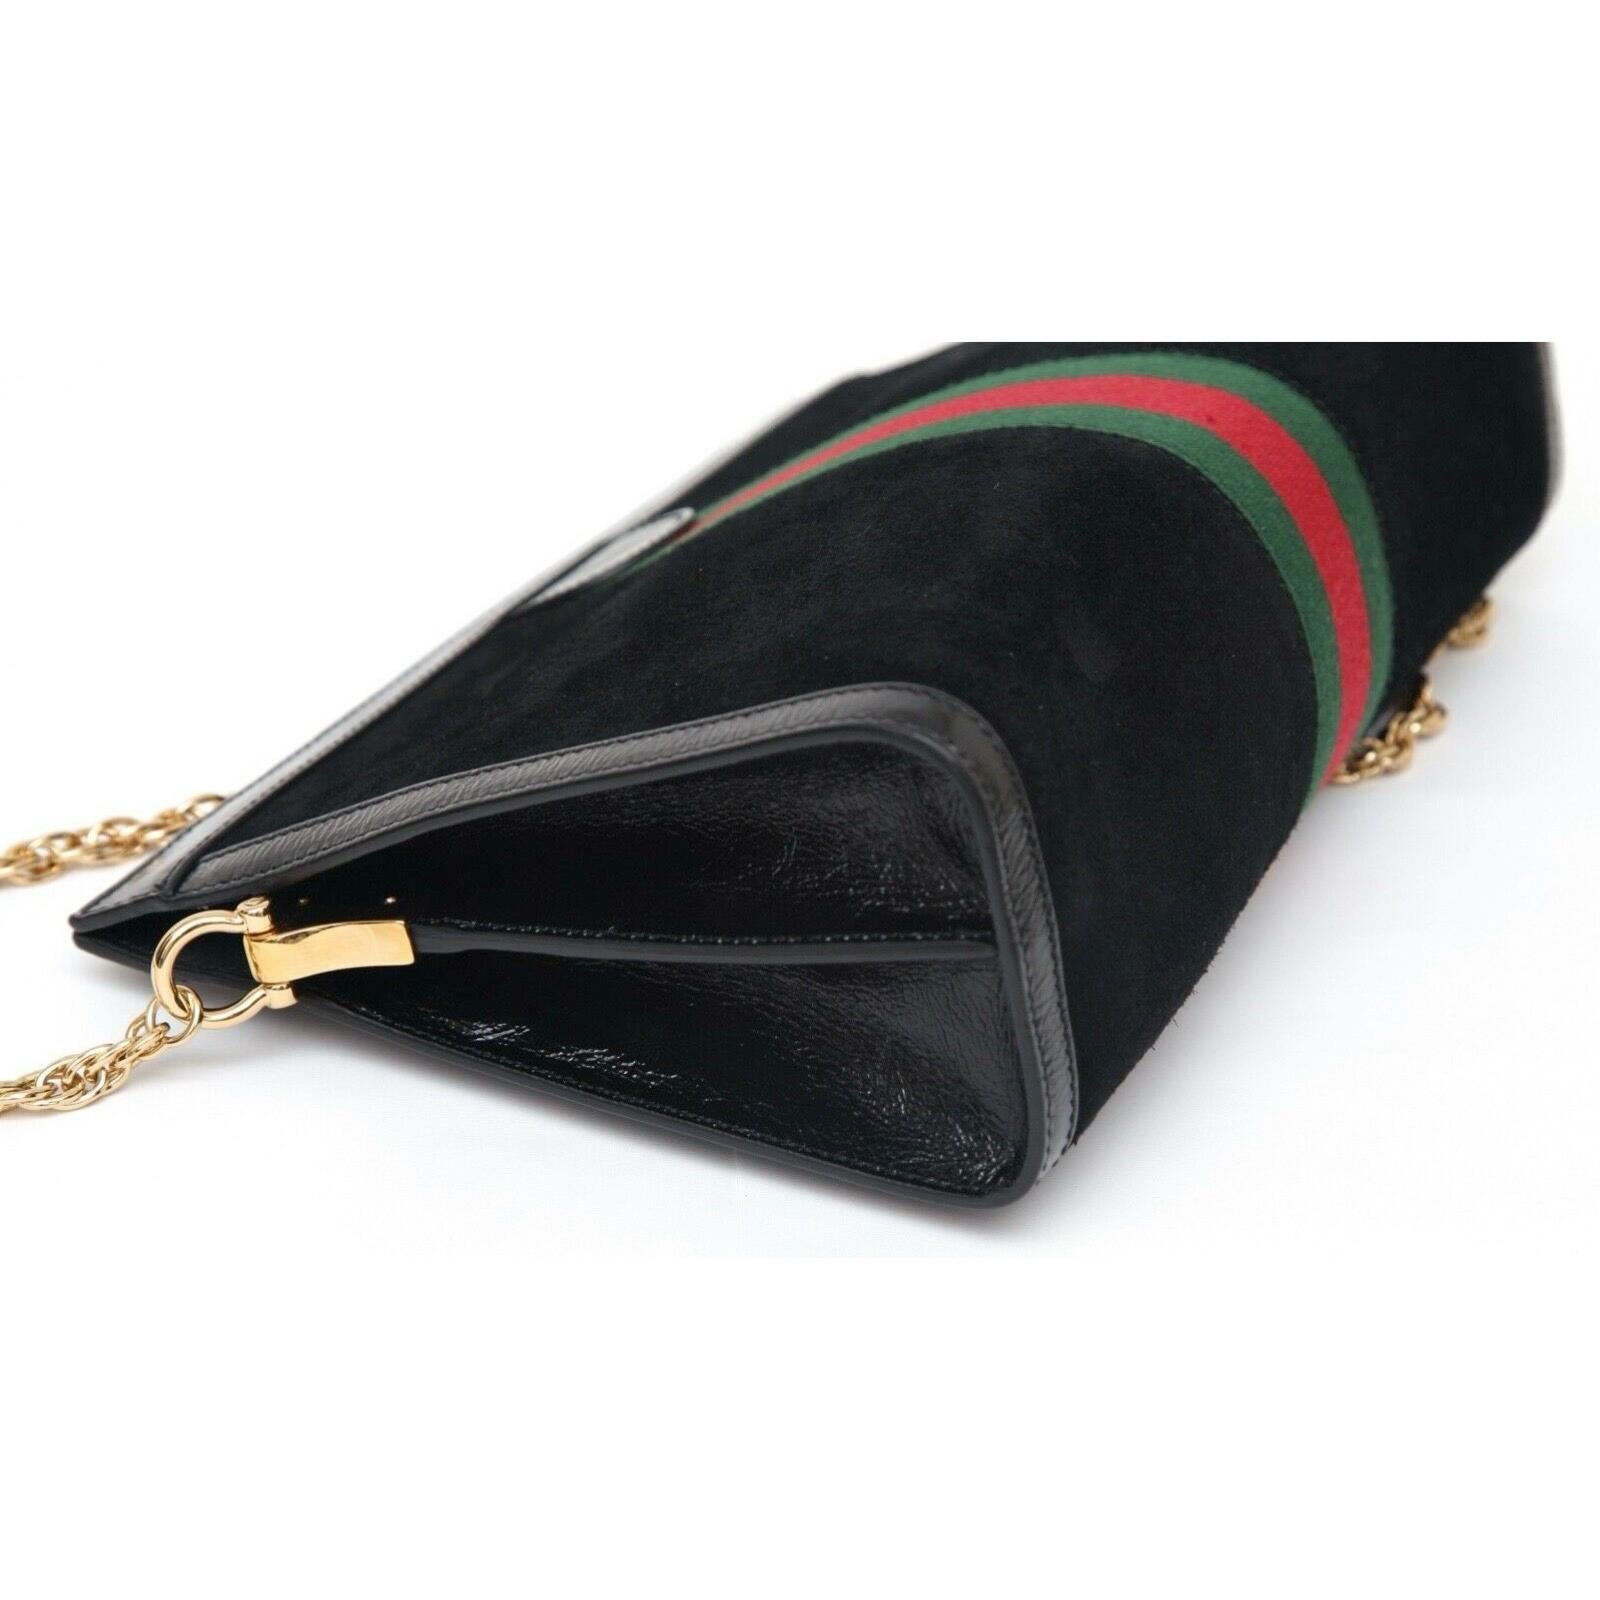 Women's GUCCI Black Suede Patent Leather Bag Medium Ophidia Web Green Chain